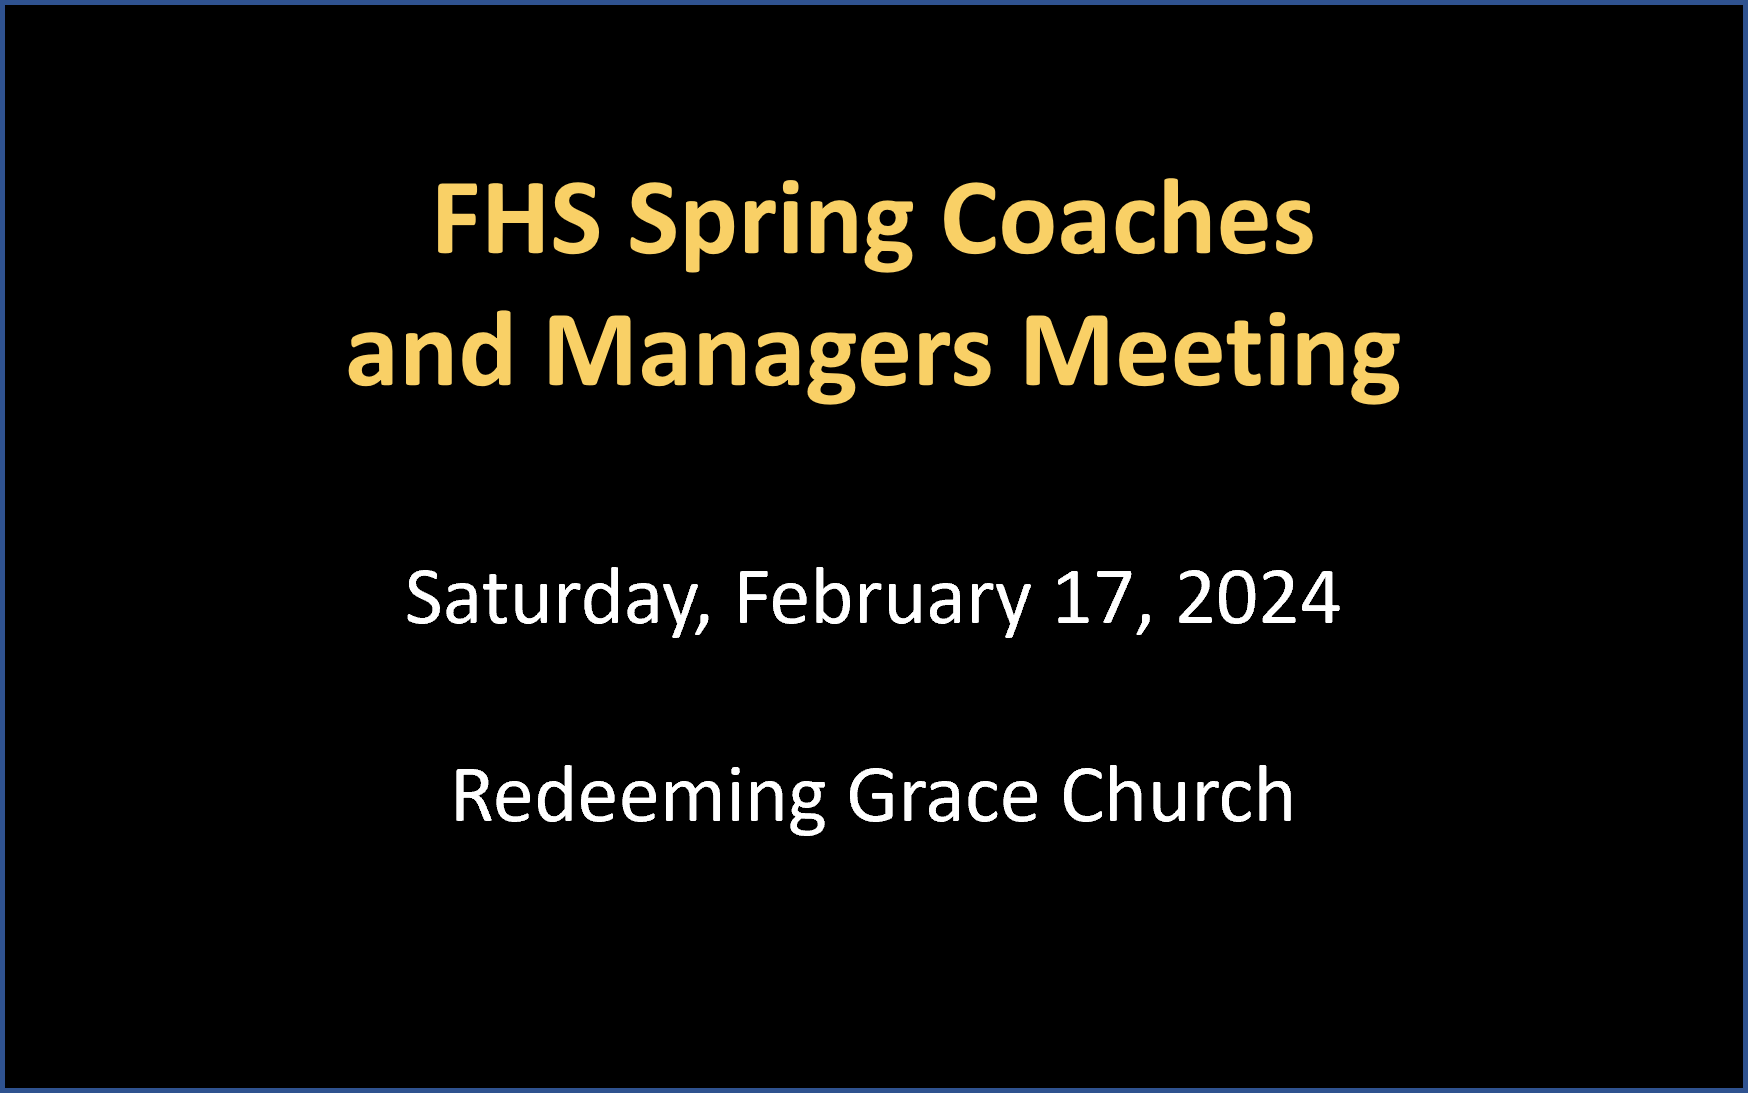 Spring Coaches and Managers Meeting